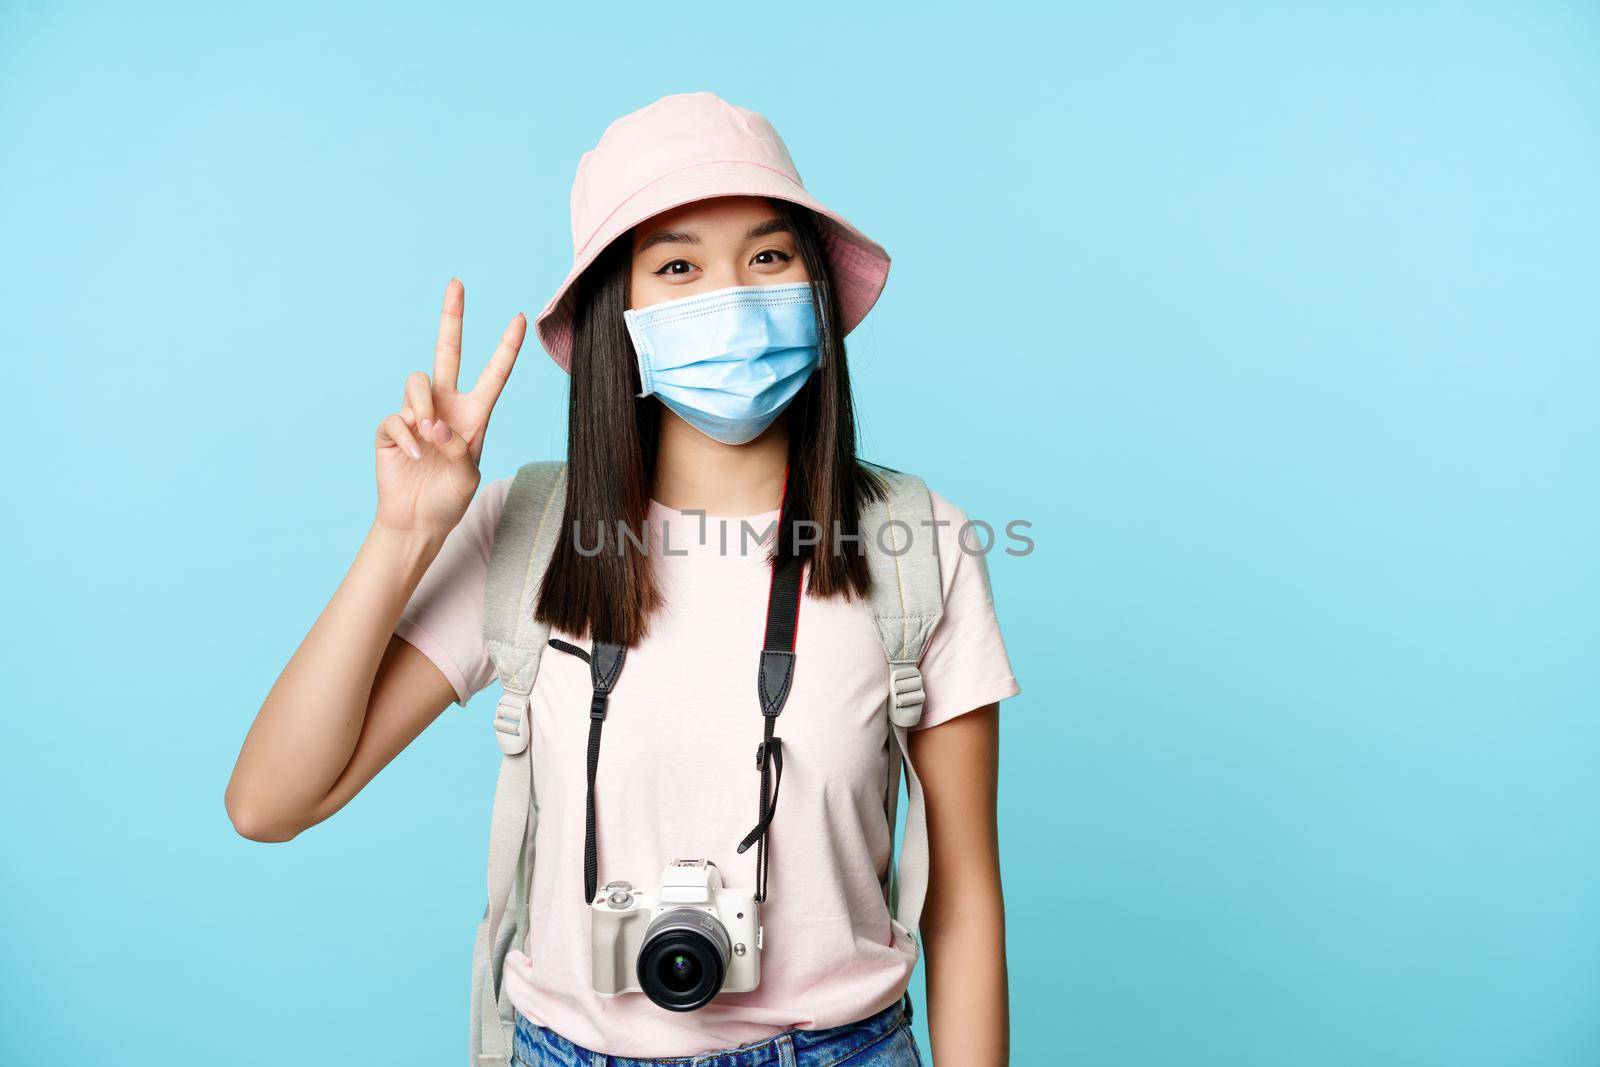 Happy korean woman in medical face mask, photo camera, showing peace v-signs, travelling during covid-19 pandemic, having vacation abroad, blue background.